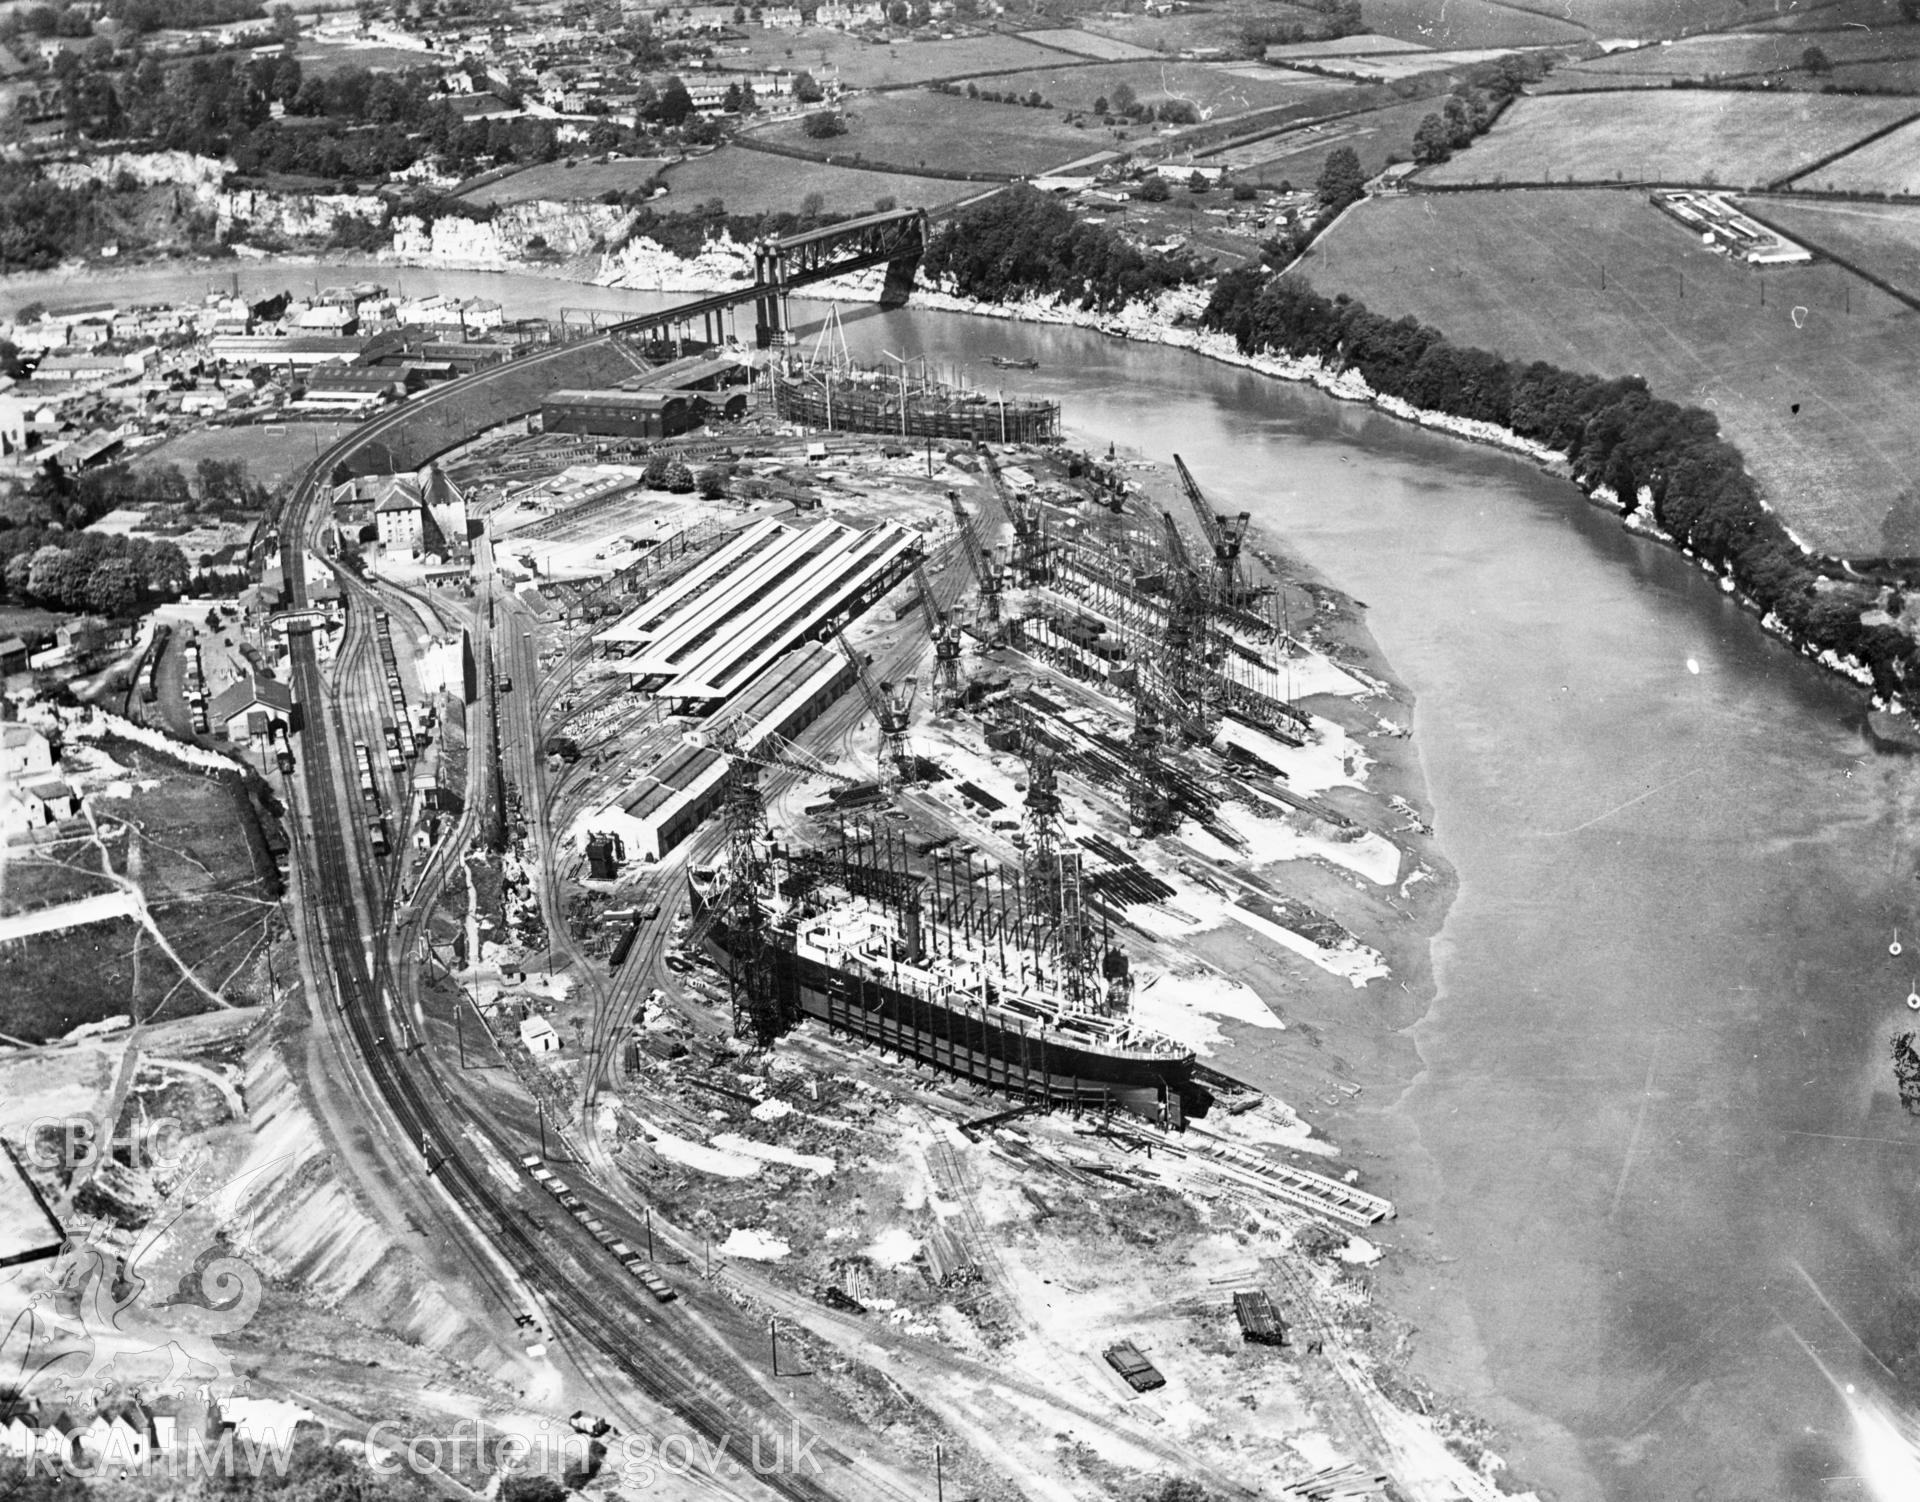 View of Chepstow showing ship building in the National Ship Yard, engineering works and tubular suspension bridge. Oblique aerial photograph.